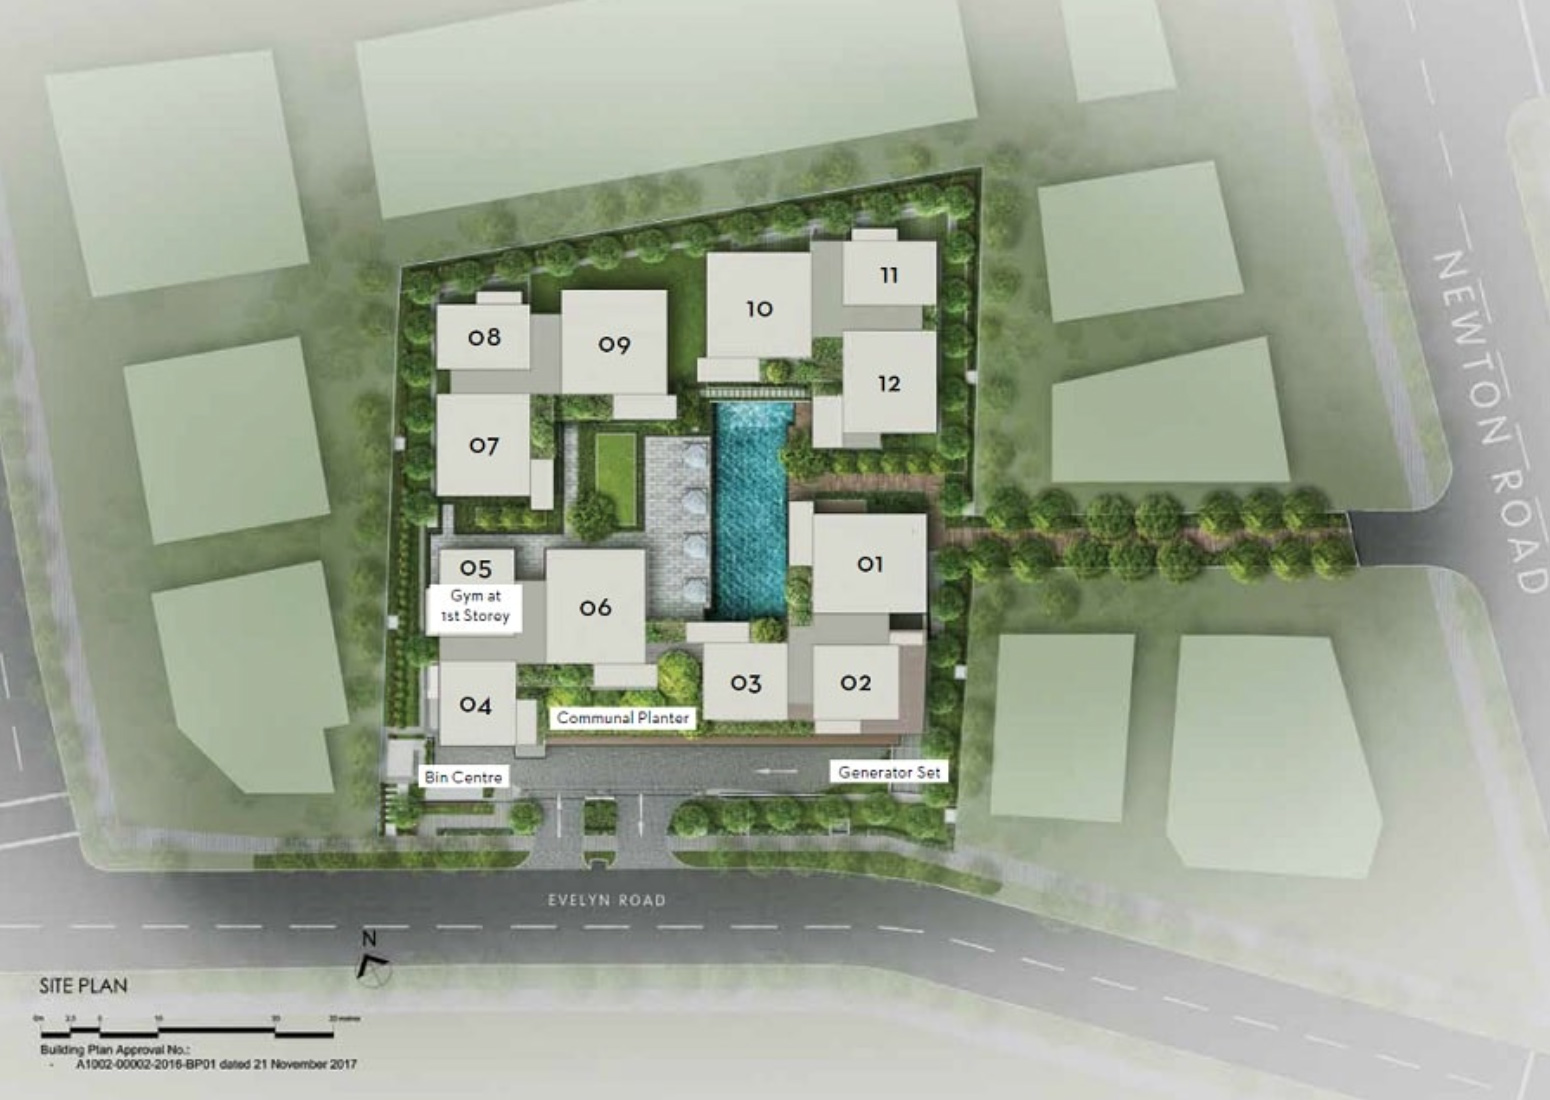 10-Evelyn-new-condo-singapore-site-plan